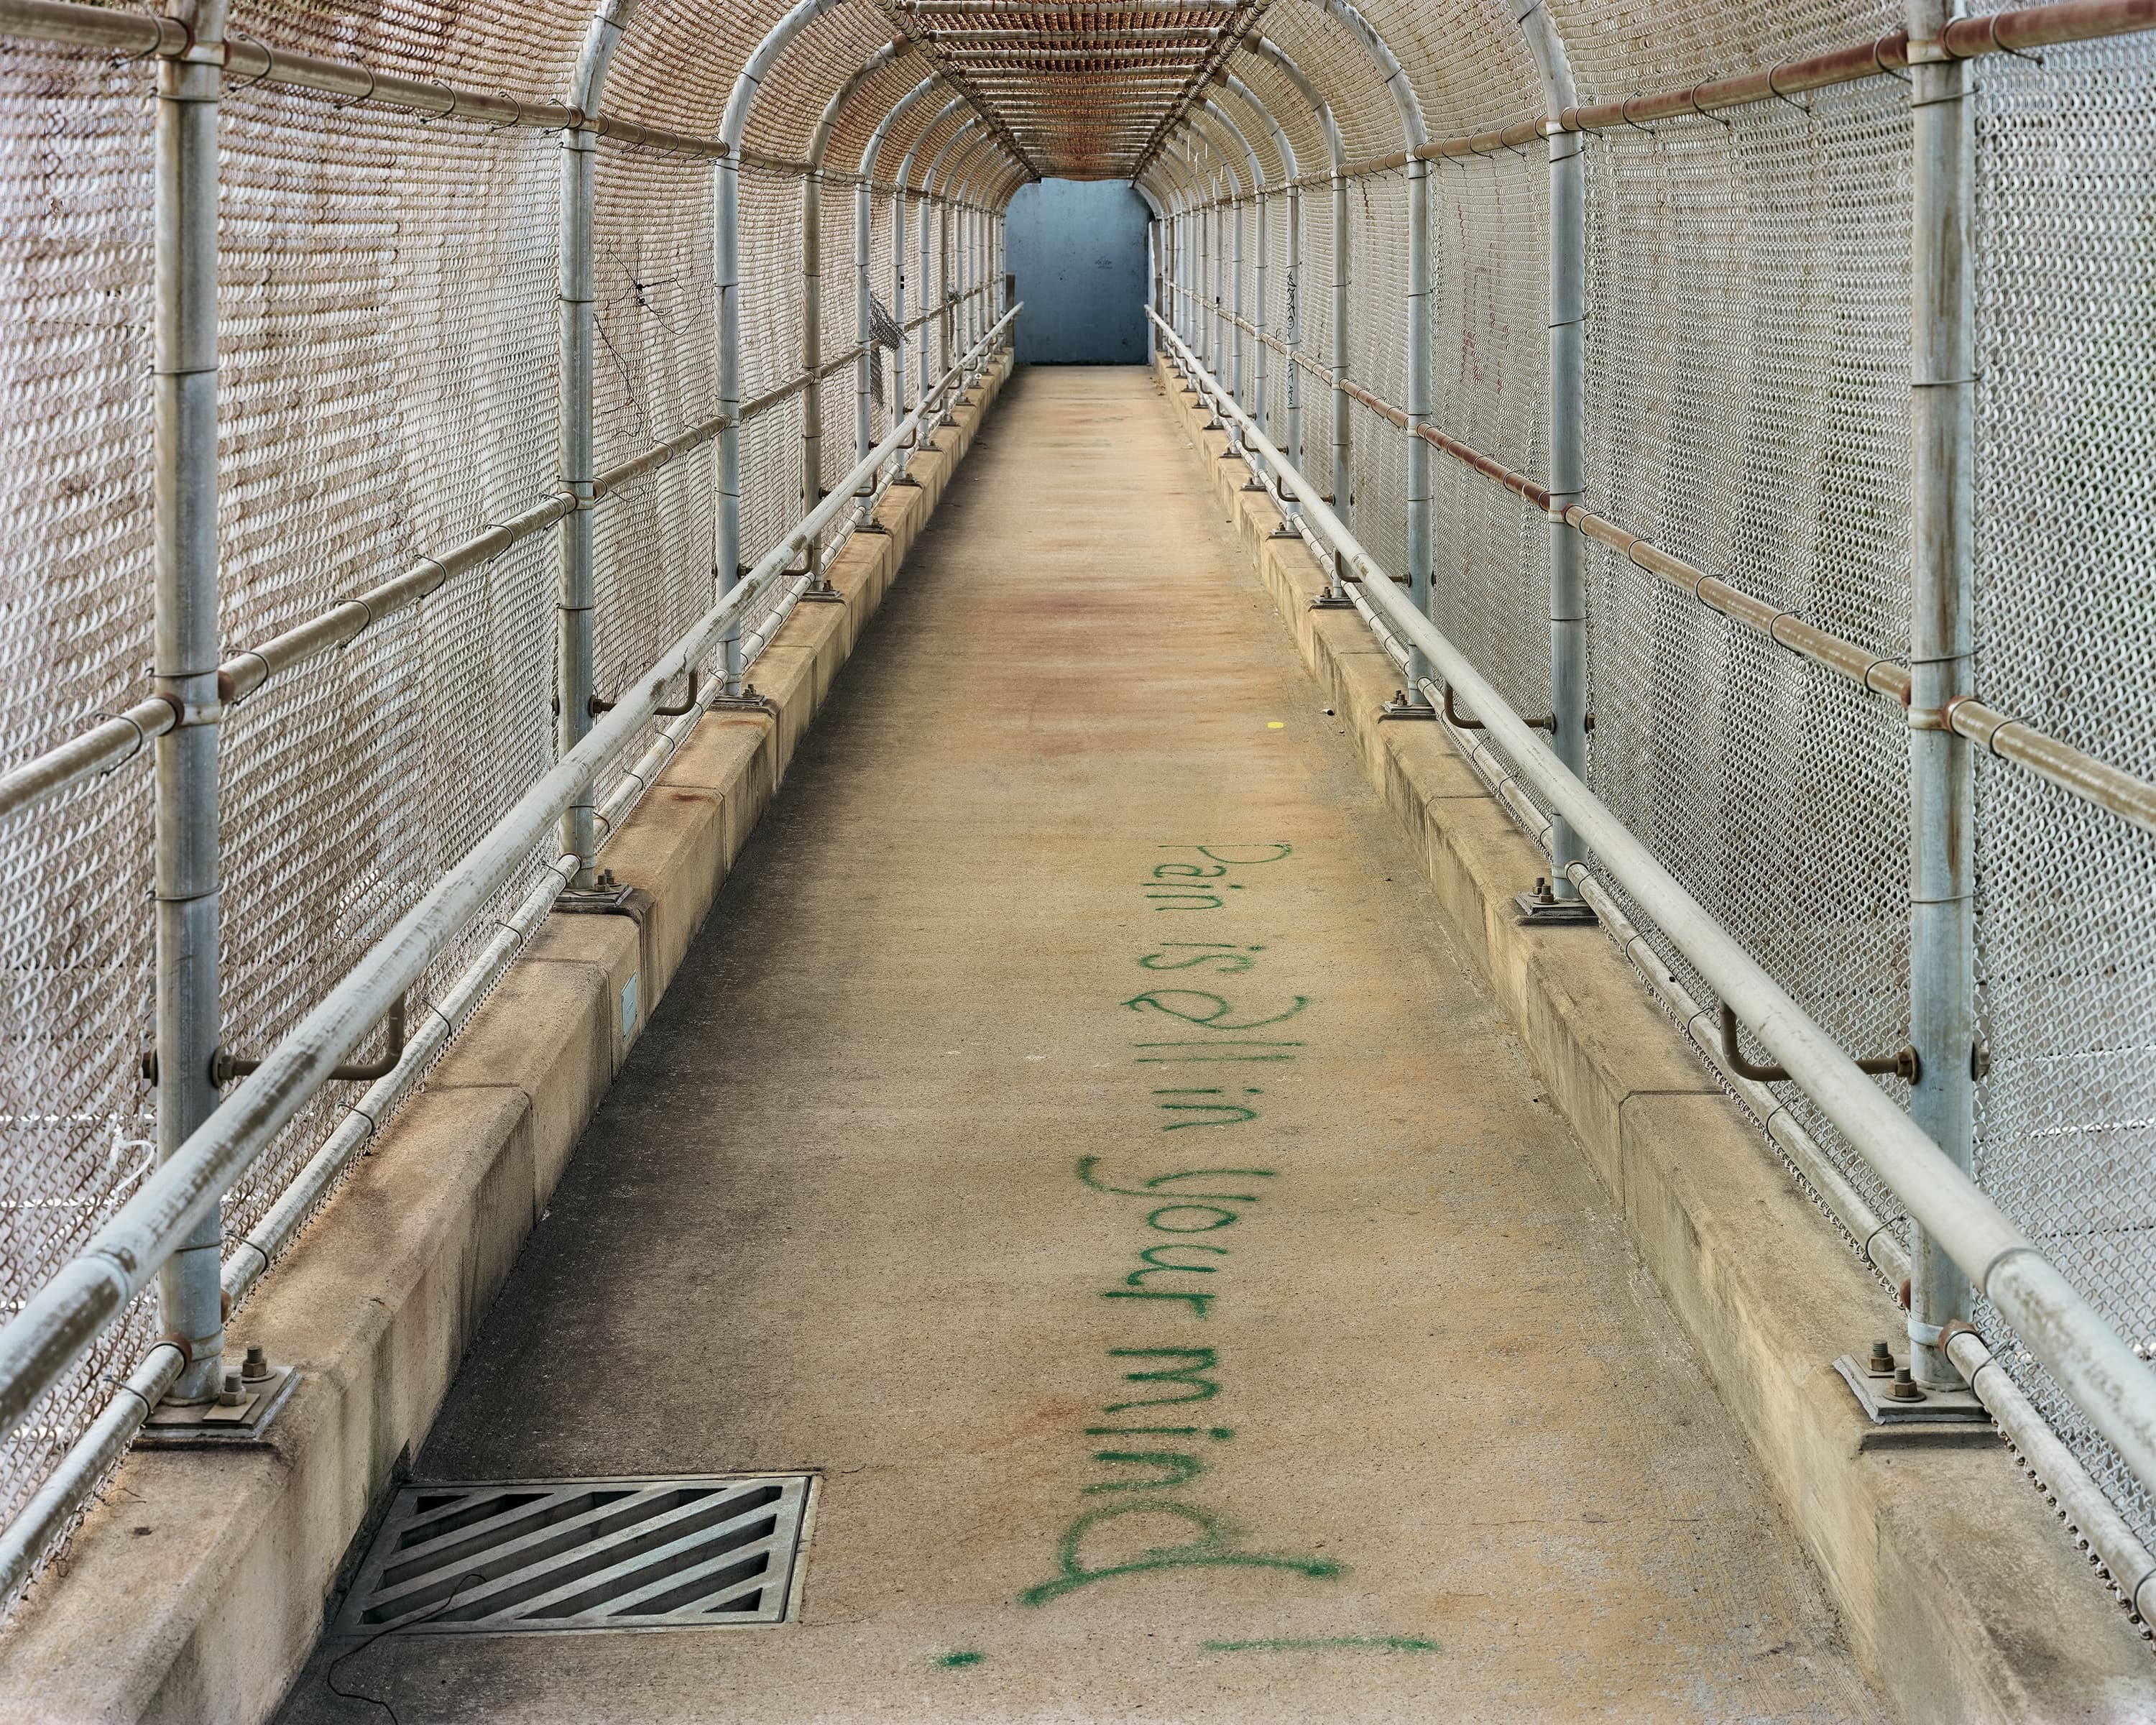 Phrase written on the floor of a pedestrian overpass in north Pittsburgh.